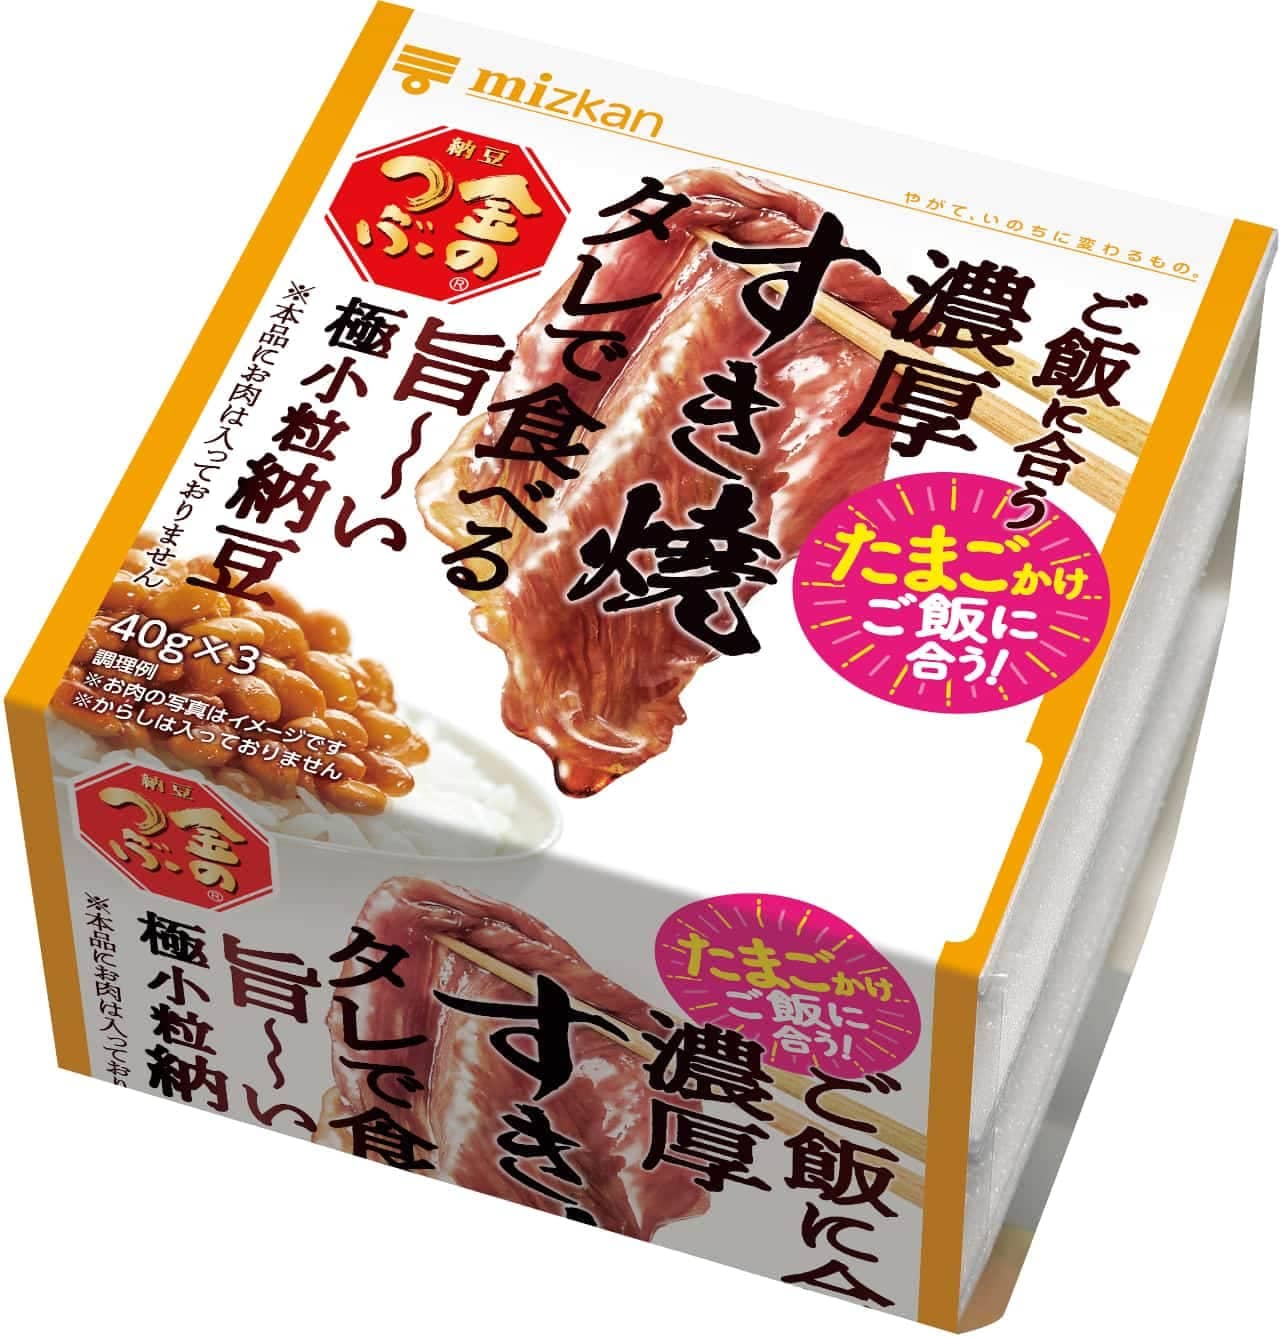 Mizkan "Eat with a rich sukiyaki sauce that goes well with golden mashed rice-very small natto"